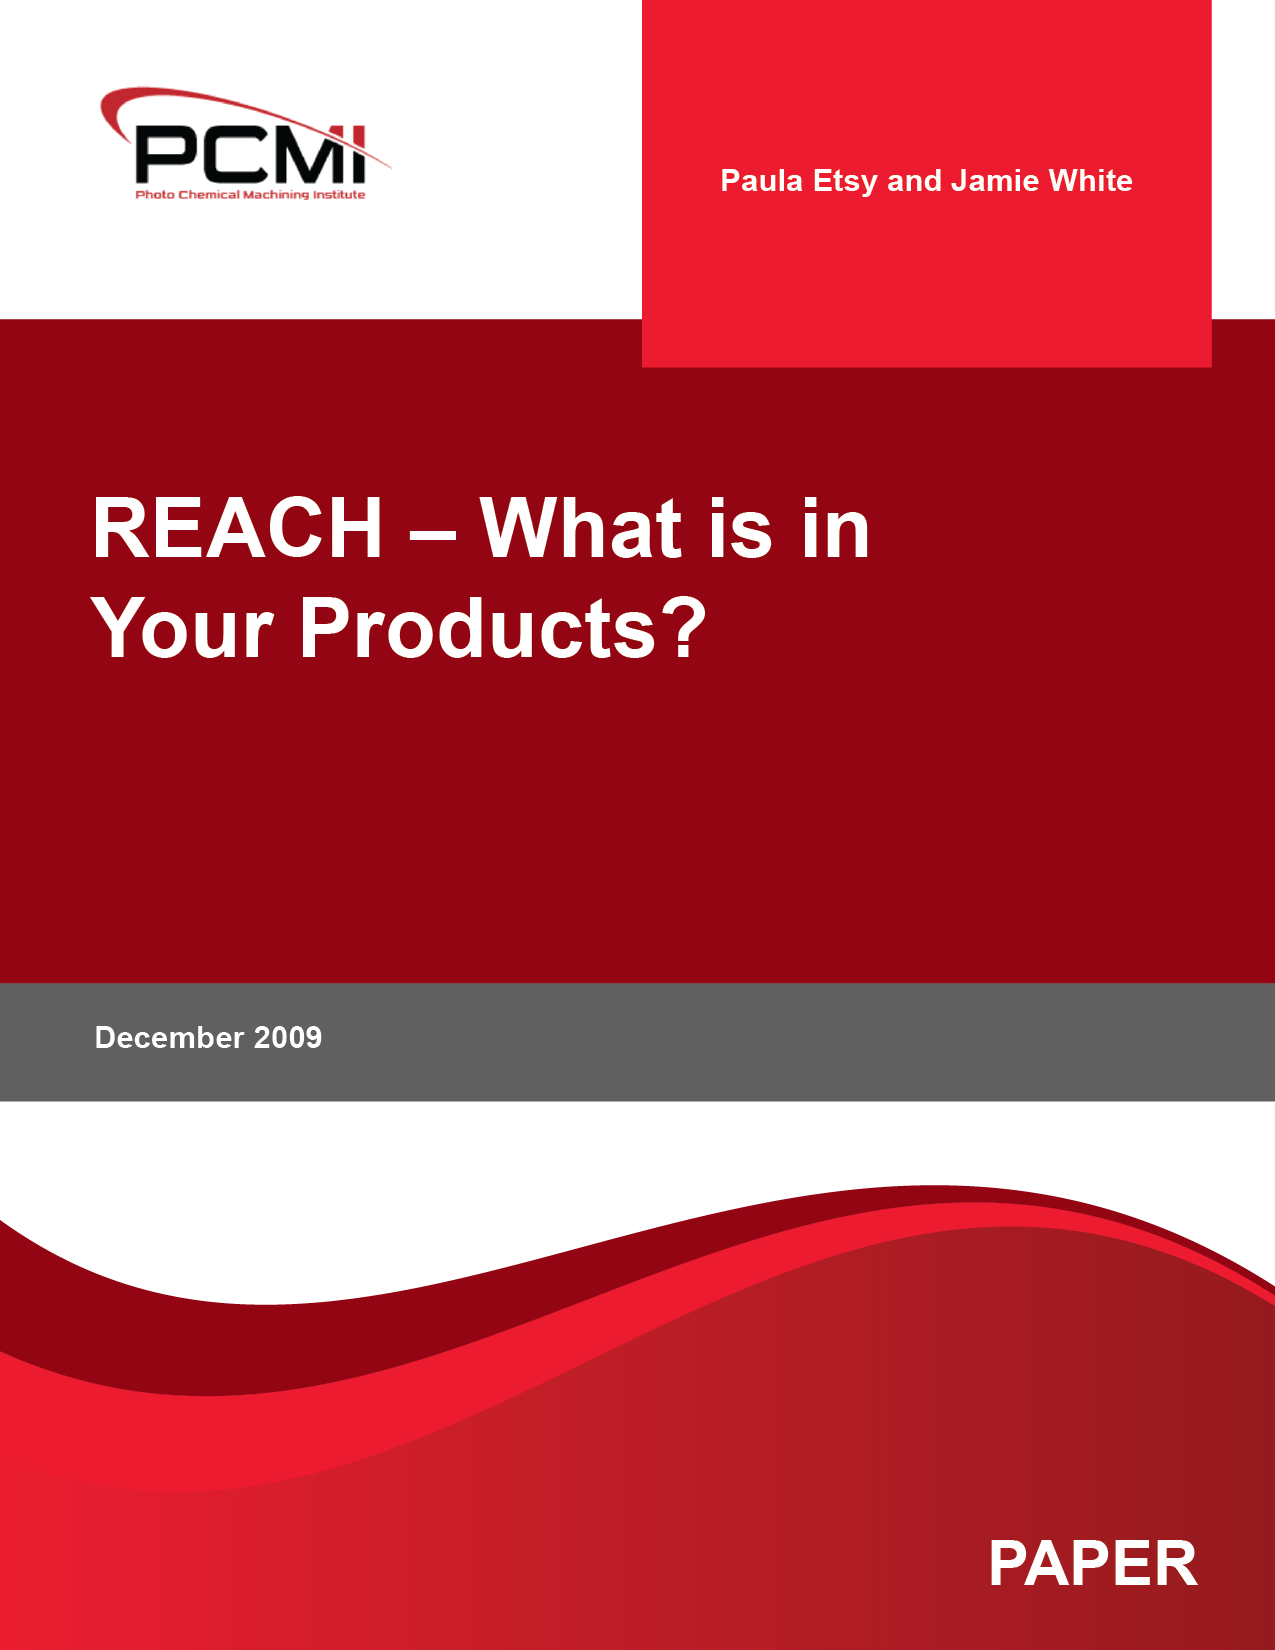 REACH – What is in Your Products?